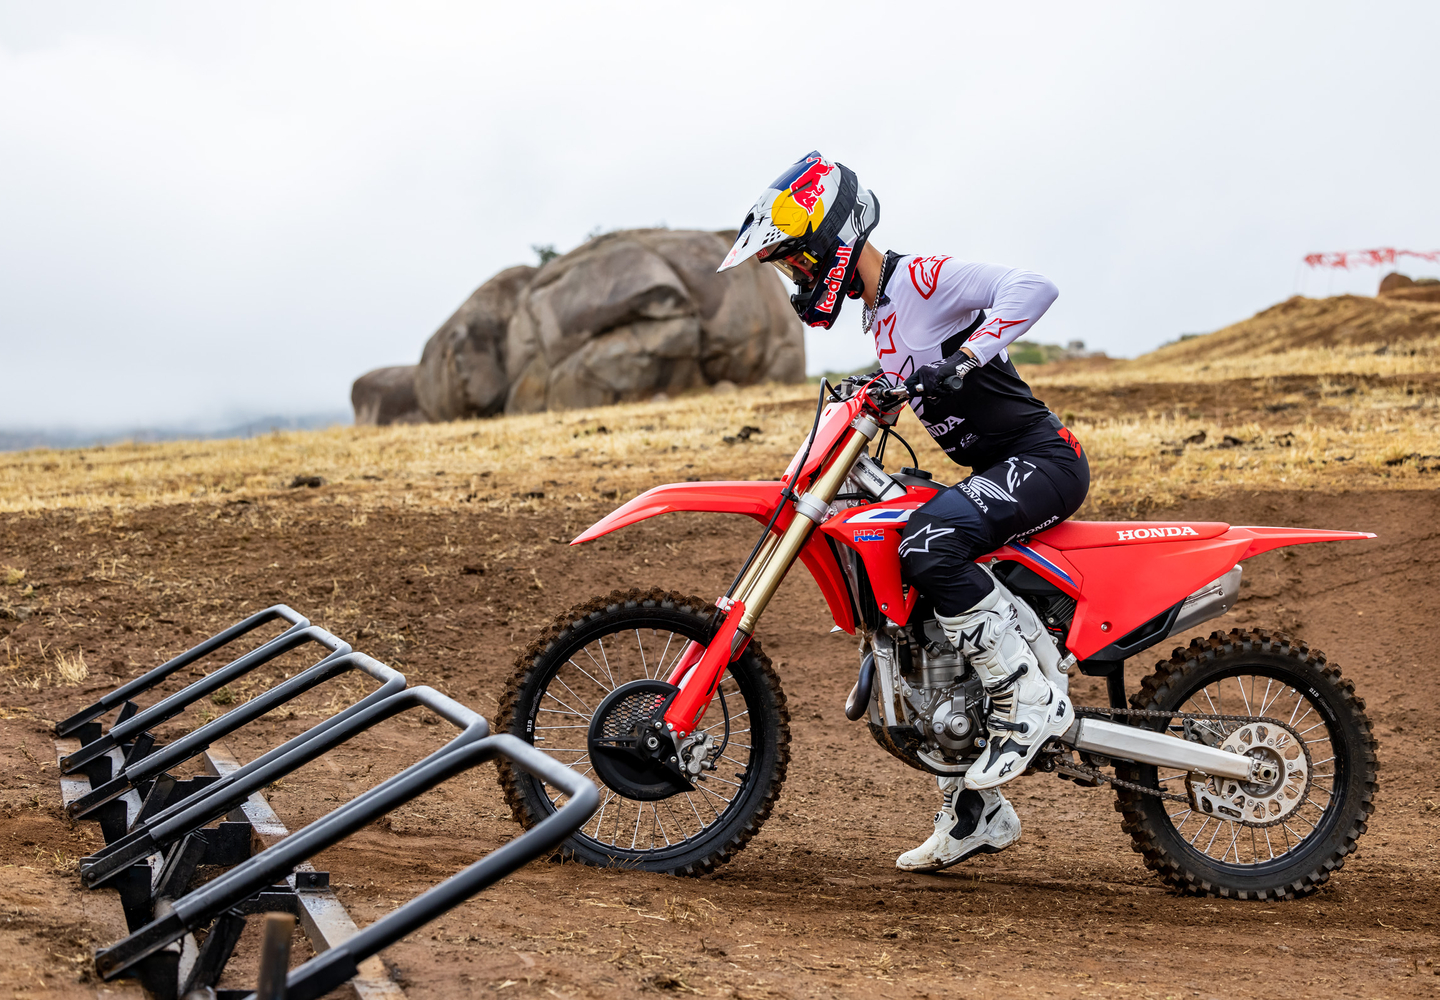 honda crf250r n competition off road